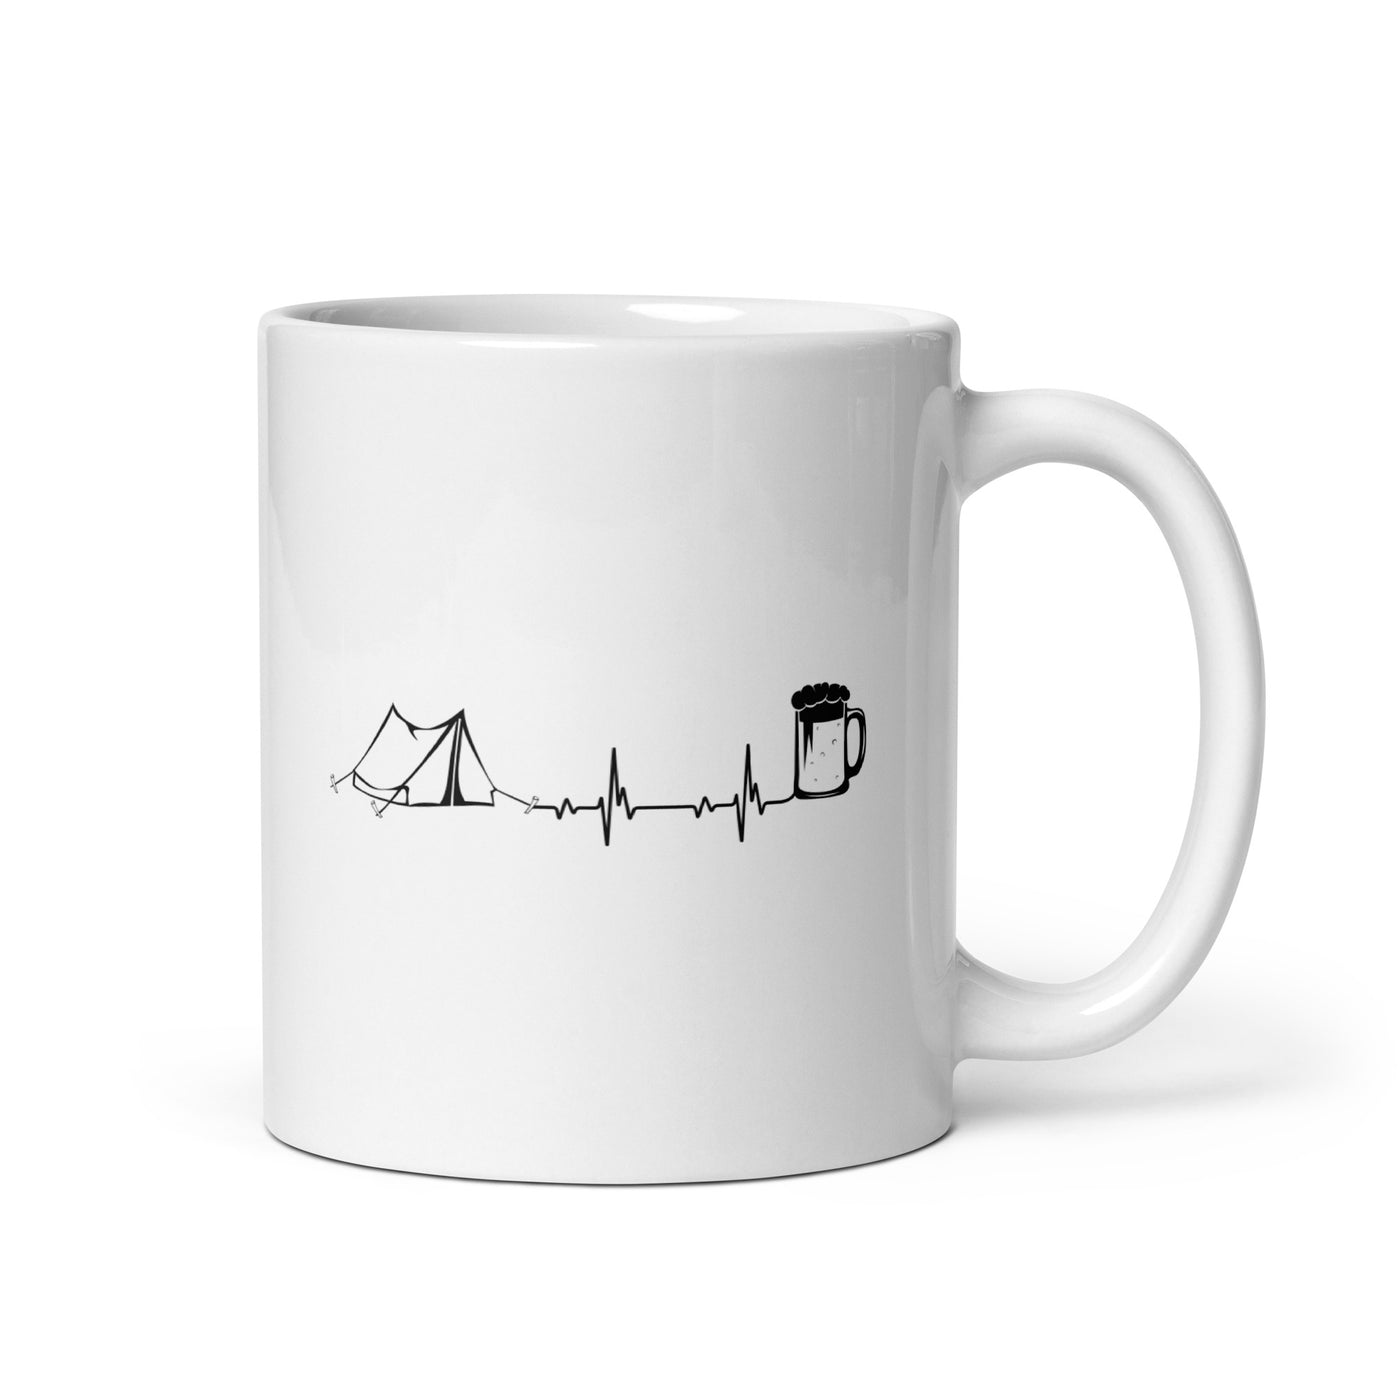 Heartbeat Beer And Camping - Tasse camping